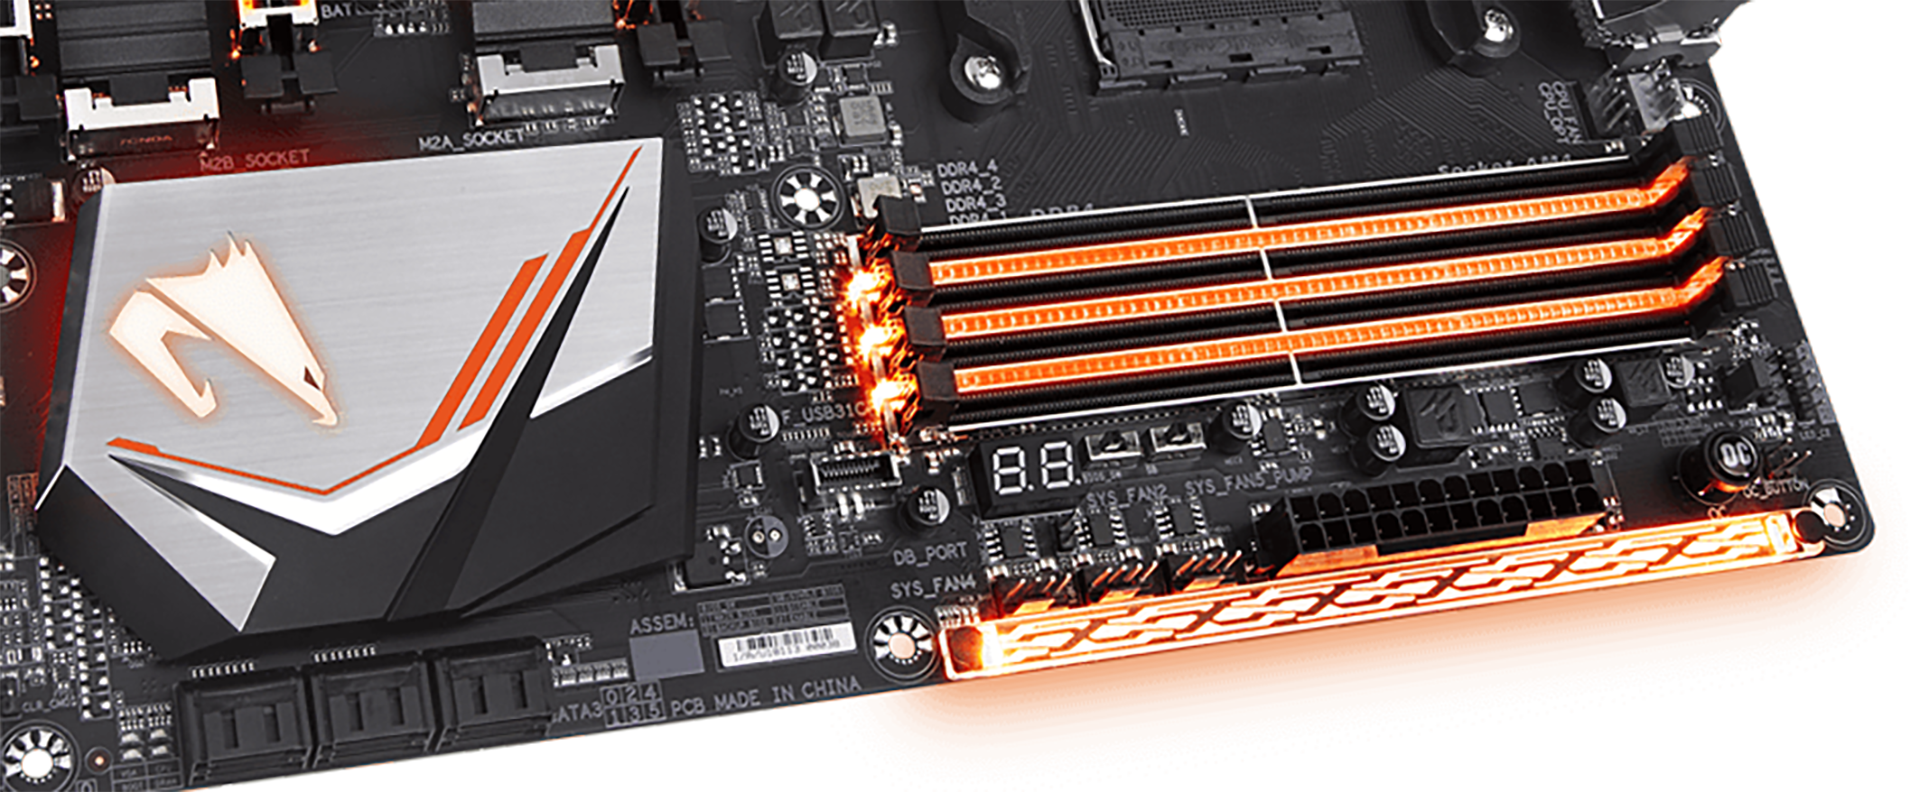 Visual Inspection The Gigabyte X470 Gaming 7 Wi Fi Motherboard Review The Am4 Aorus Flagship